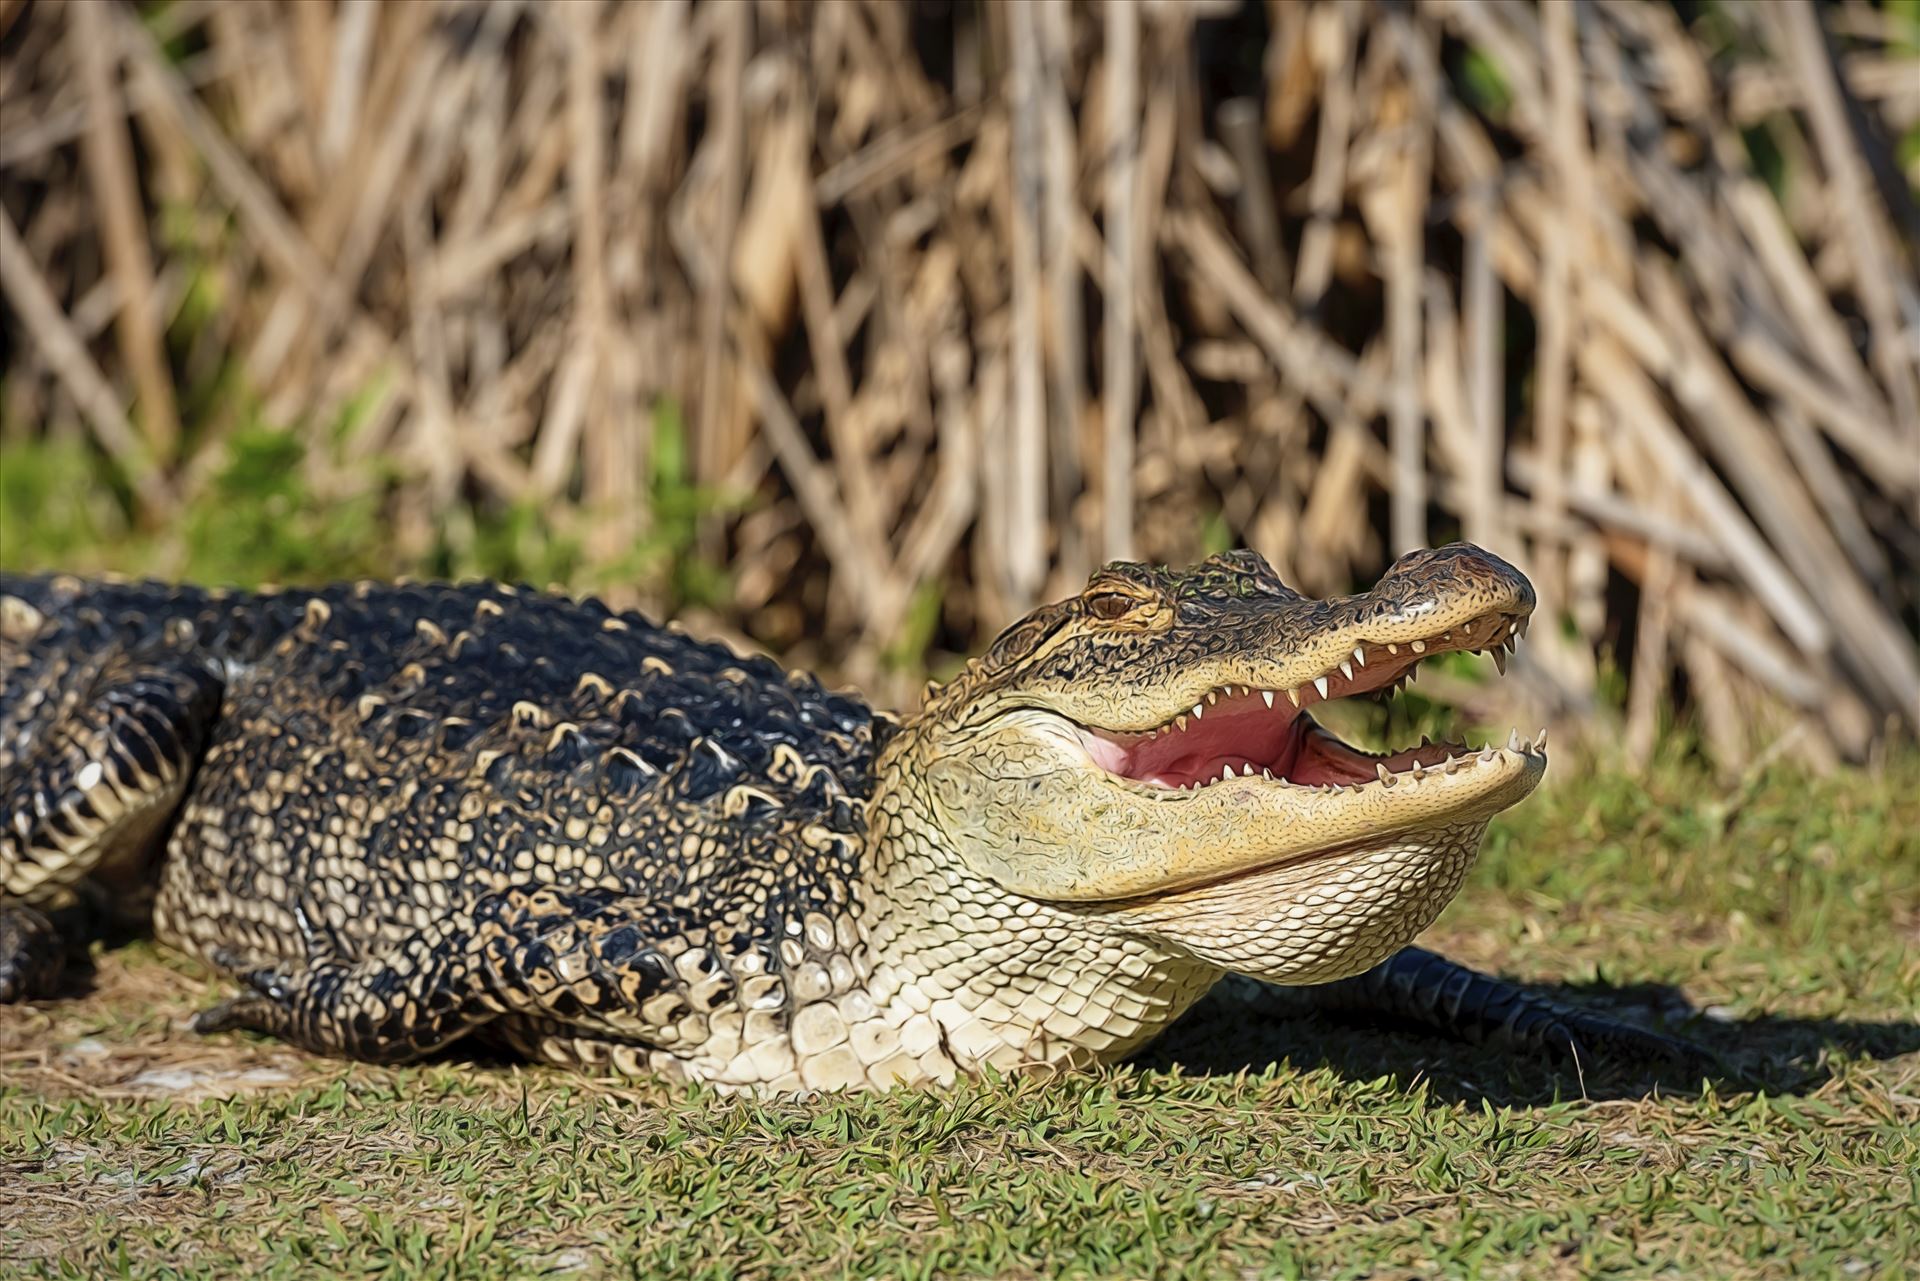 Alligator sunning and smiling for the camera at gator lake, st. andrews state park, panama city beach, florida 8108703.jpg This 5 foot alligator likes to come out of gator lake and sun himself in the late afternoon.  It took lots of coaxing to get this gator to smile for the camera. by Terry Kelly Photography